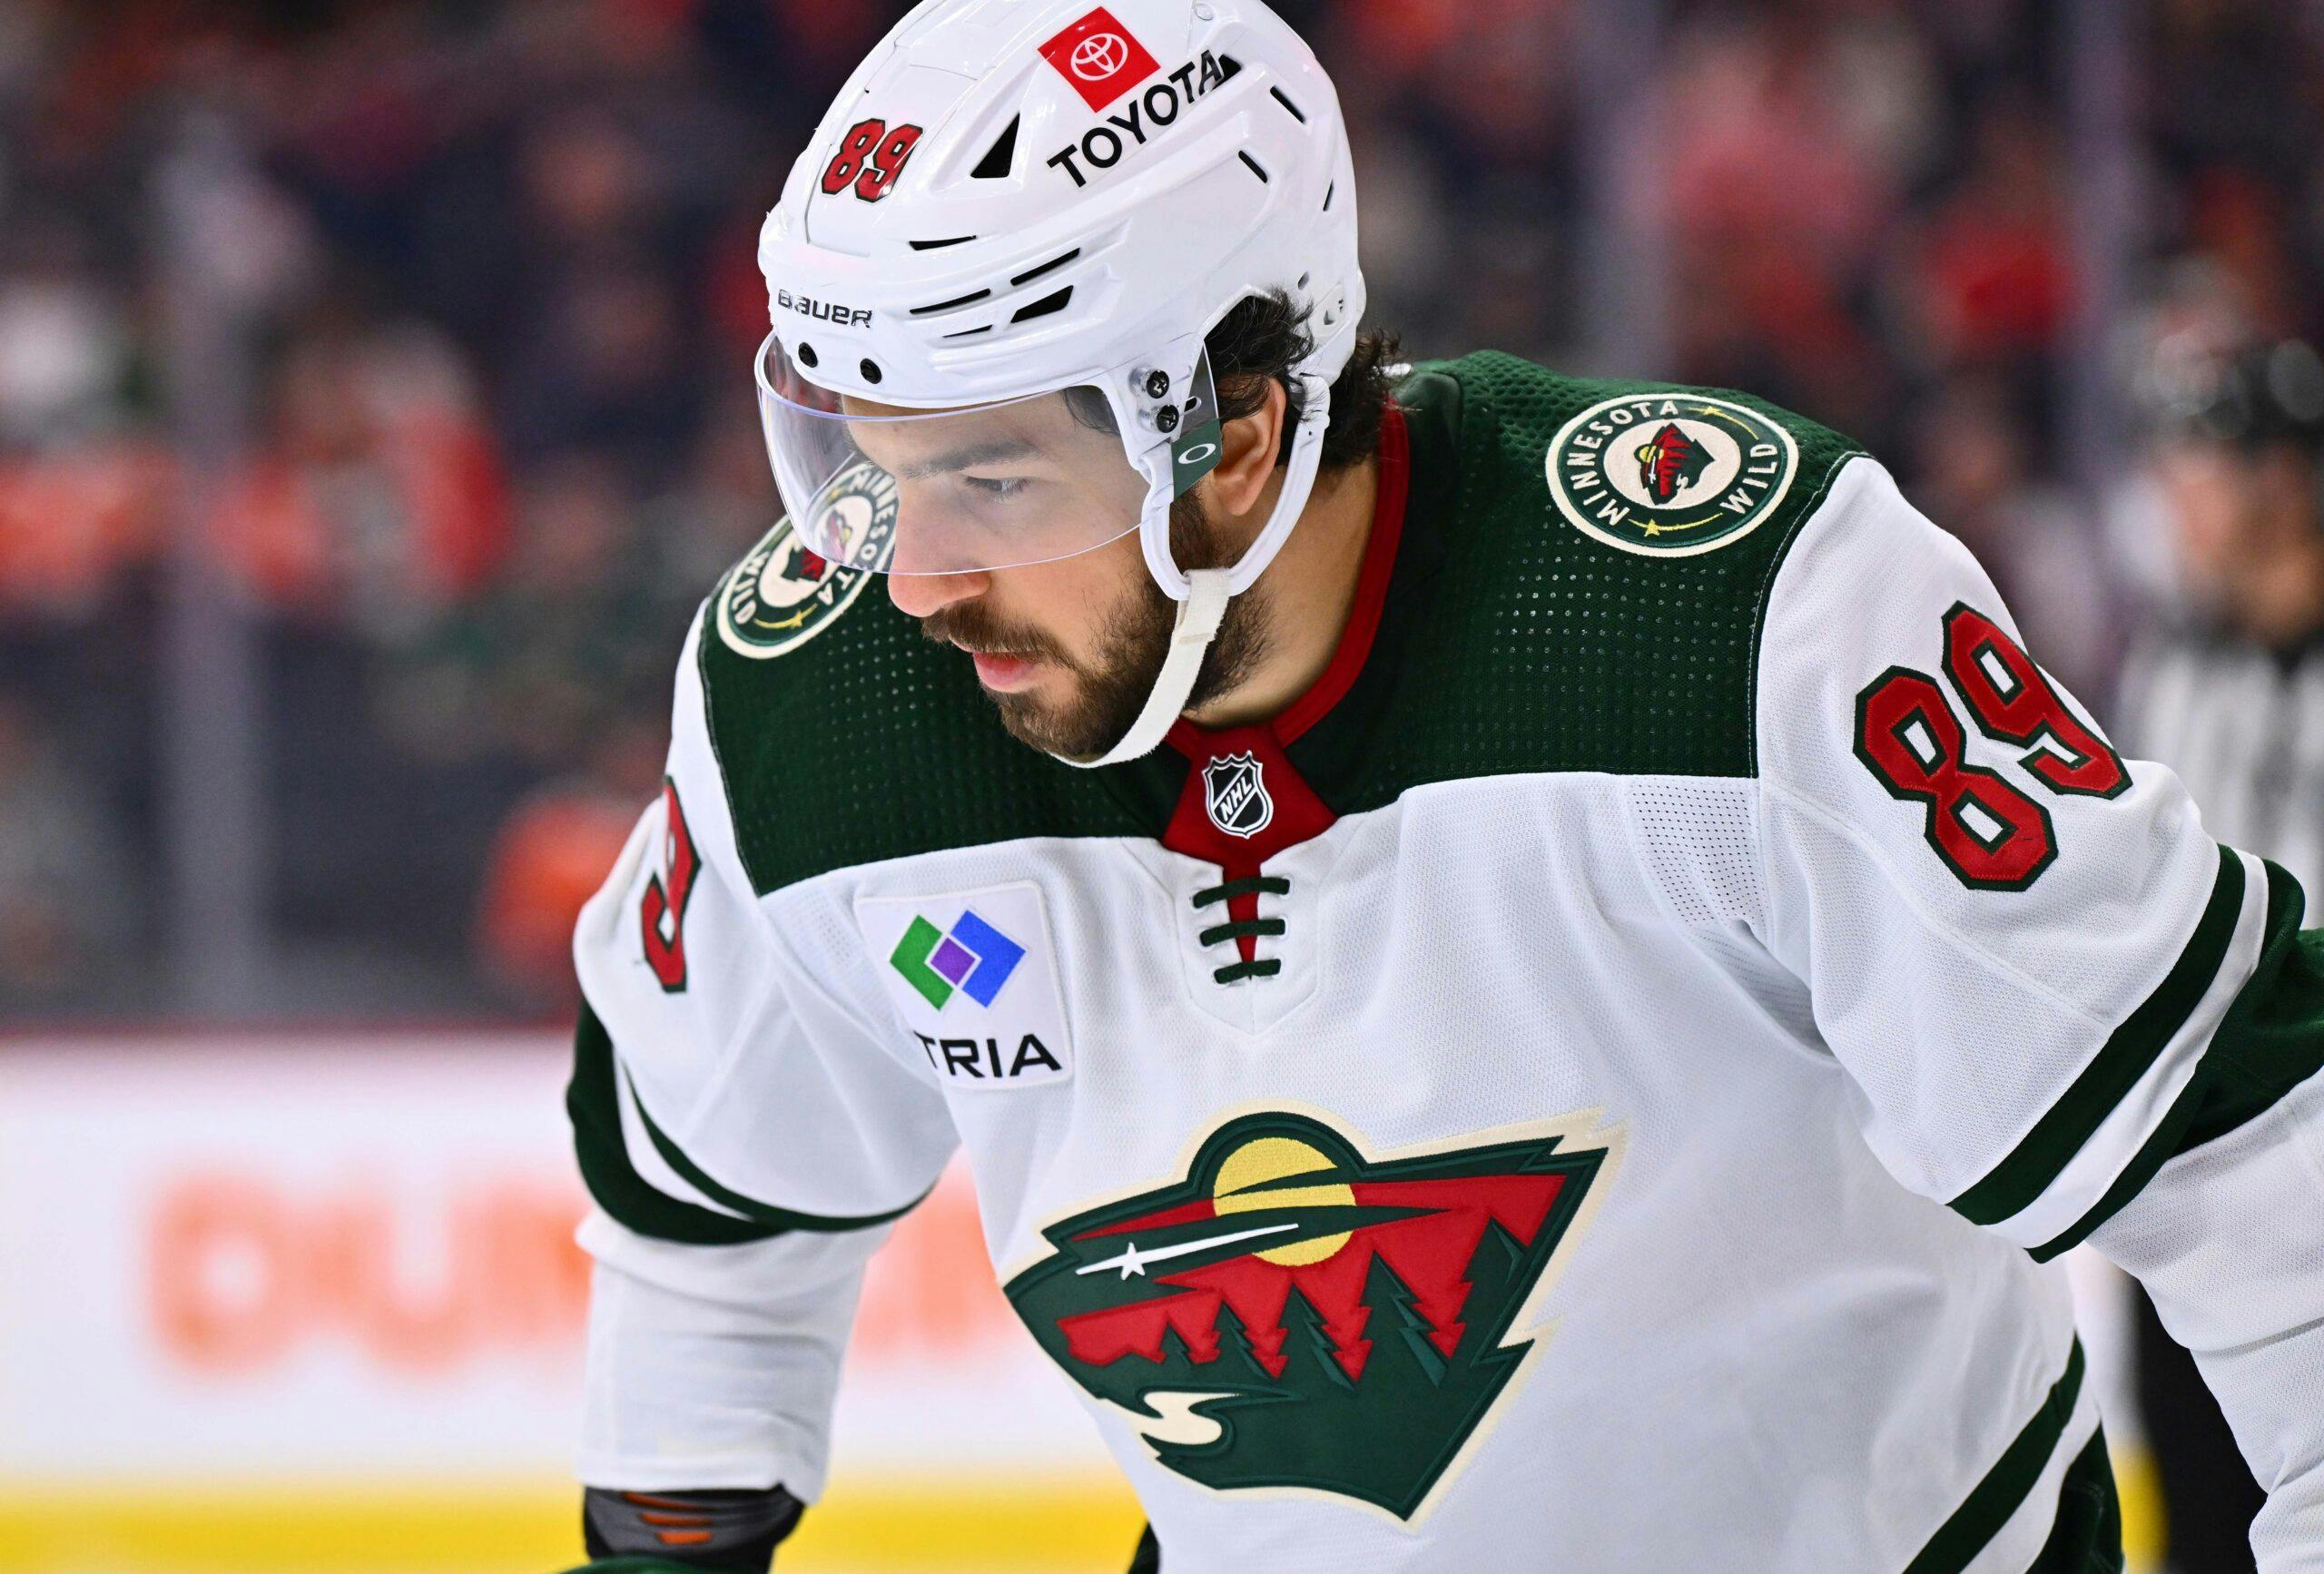 Minnesota Wild’s Frederick Gaudreau to miss Friday’s game vs Panthers